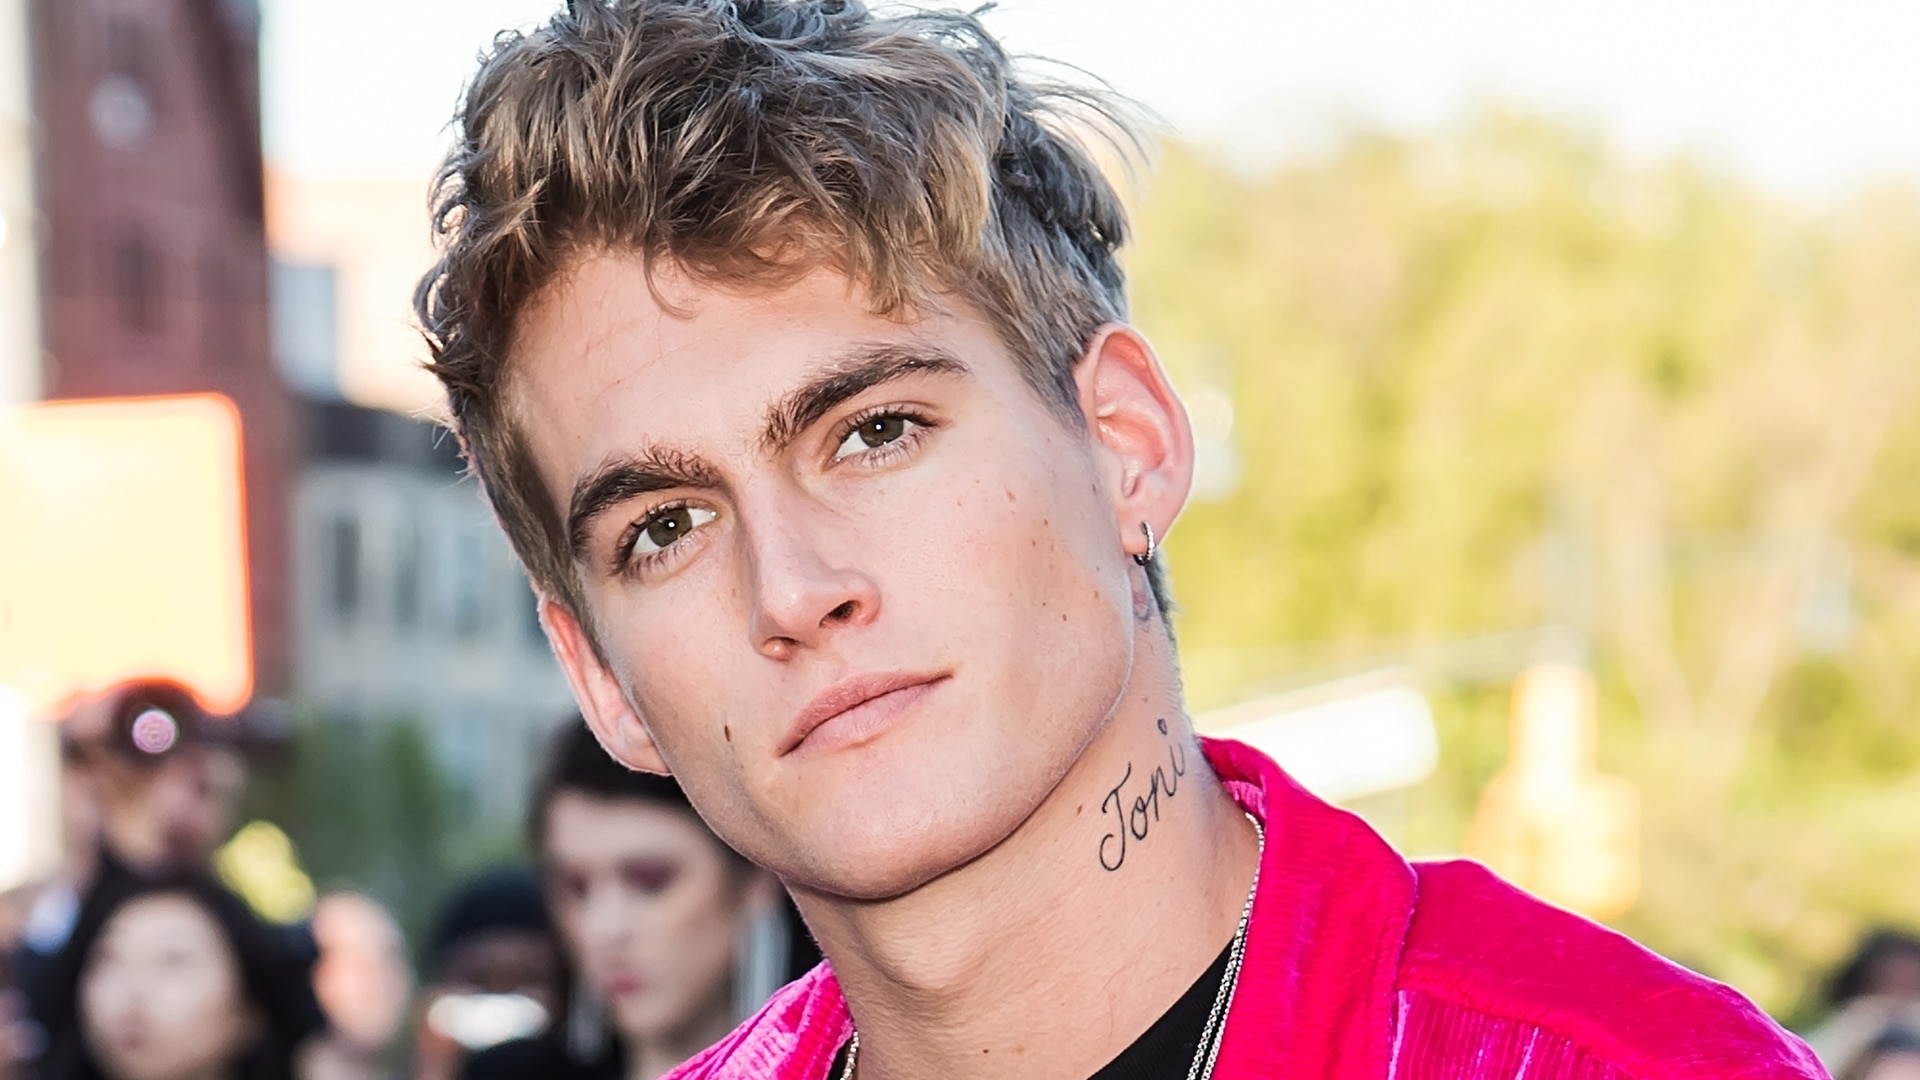 Watch Access Hollywood Interview: Presley Gerber’s New Face Tattoo Is